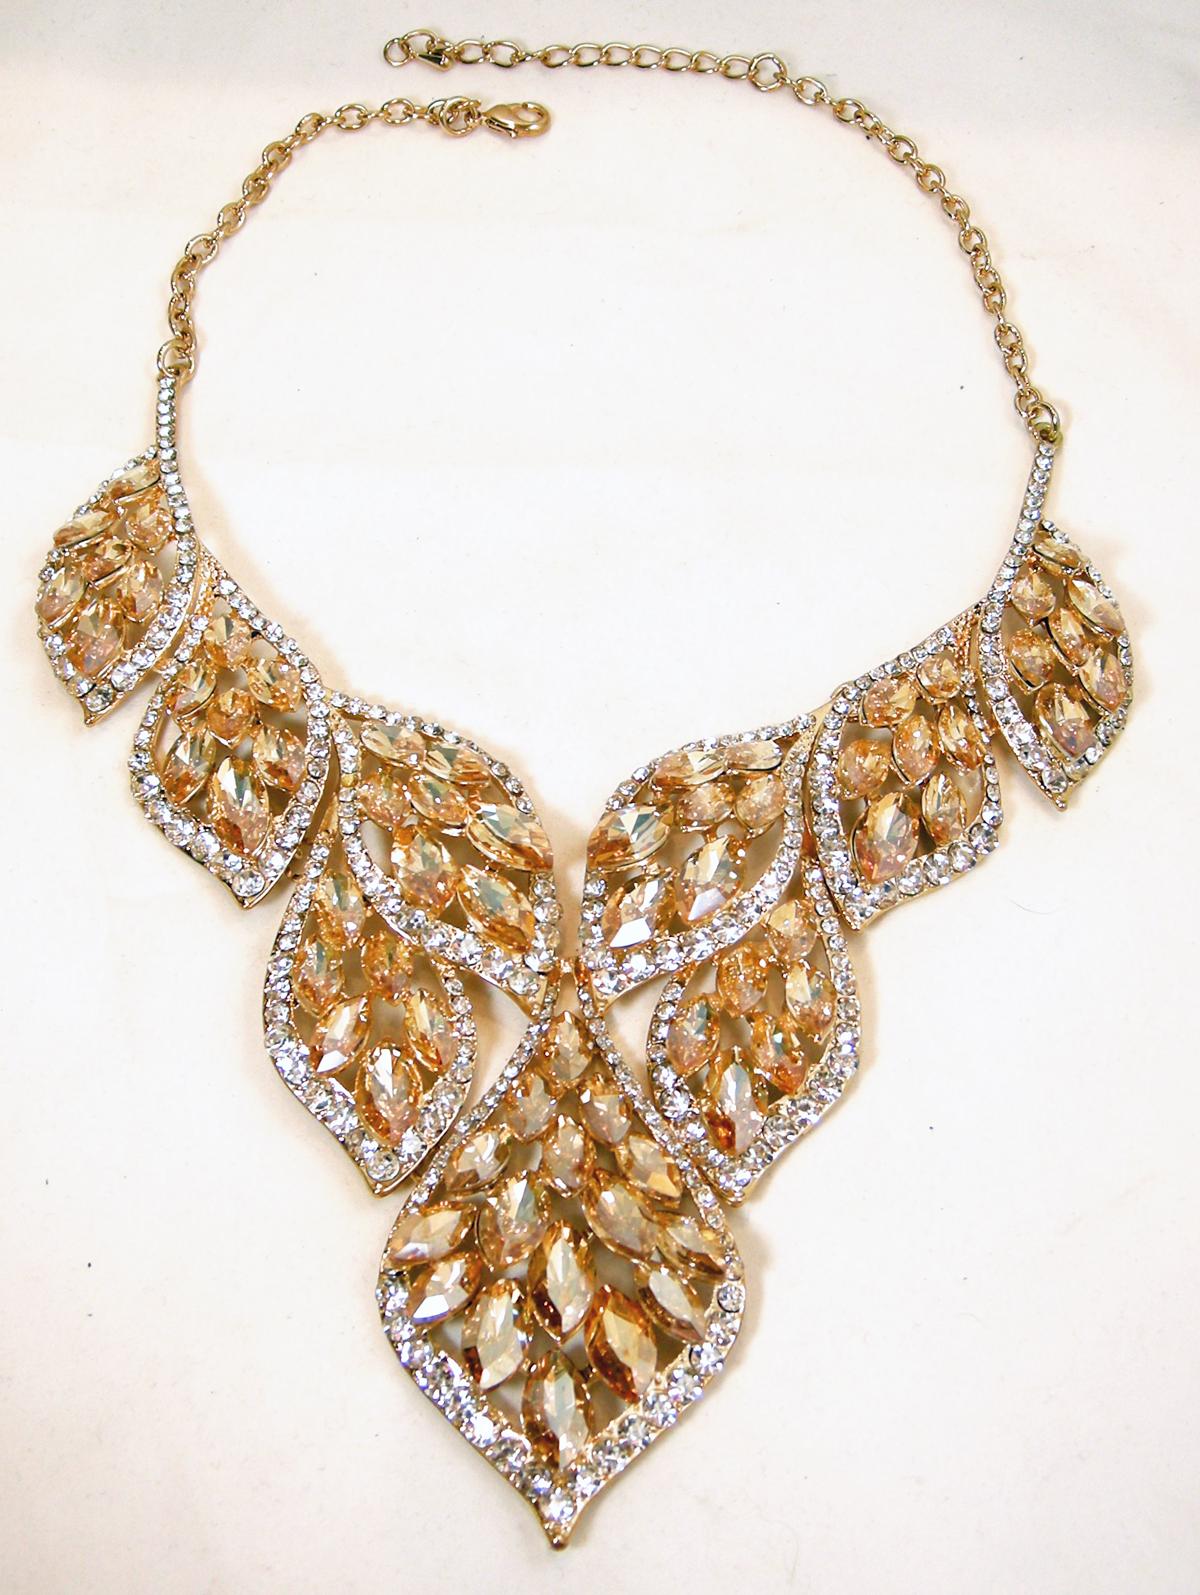 This stunning bib necklace has citrine crystals with clear crystal accents in a gold tone setting.  In excellent condition, this necklace measures 19-1/2” long with a spring clasp. The front drop, top to bottom, measures 3-1/2”.